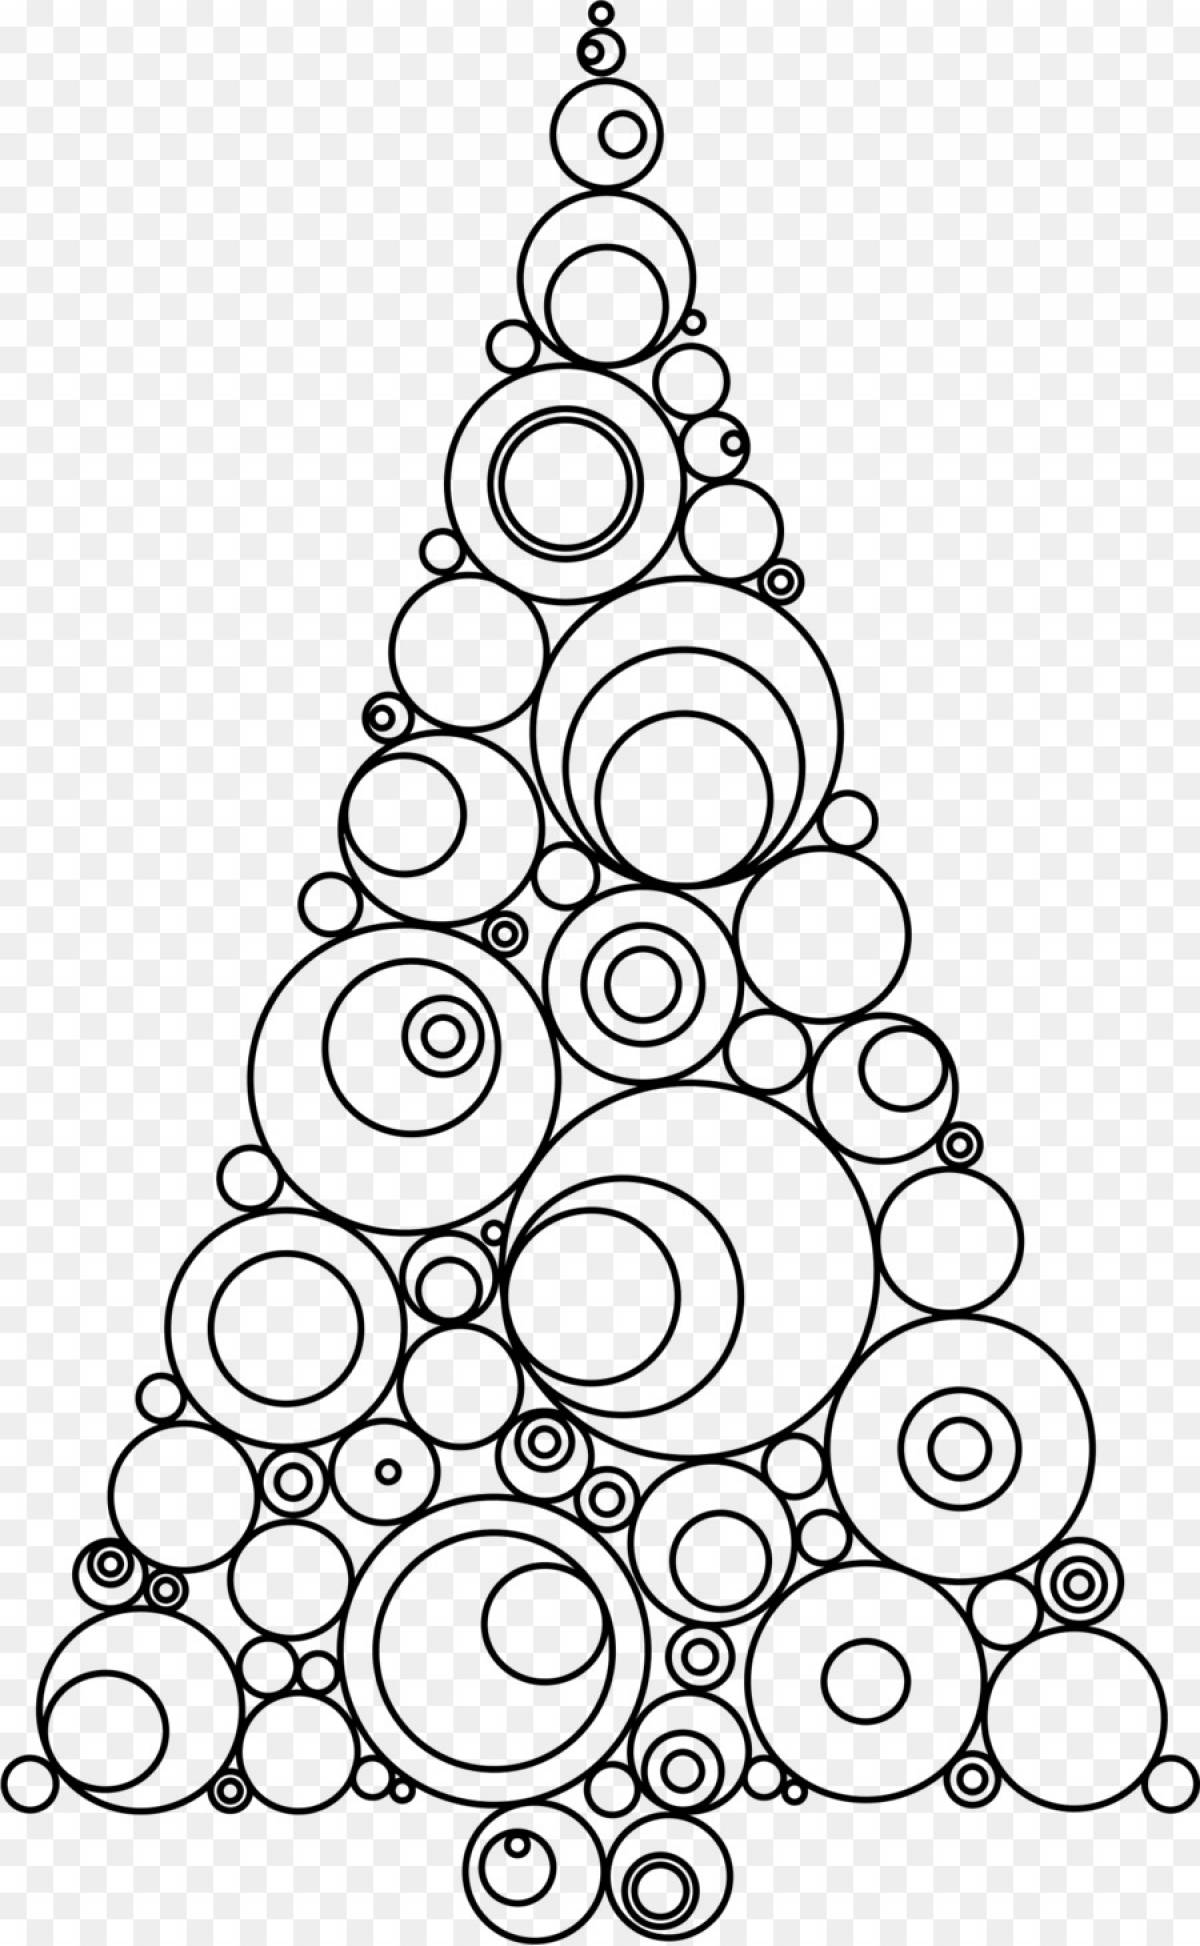 Antistress Christmas tree with a pattern